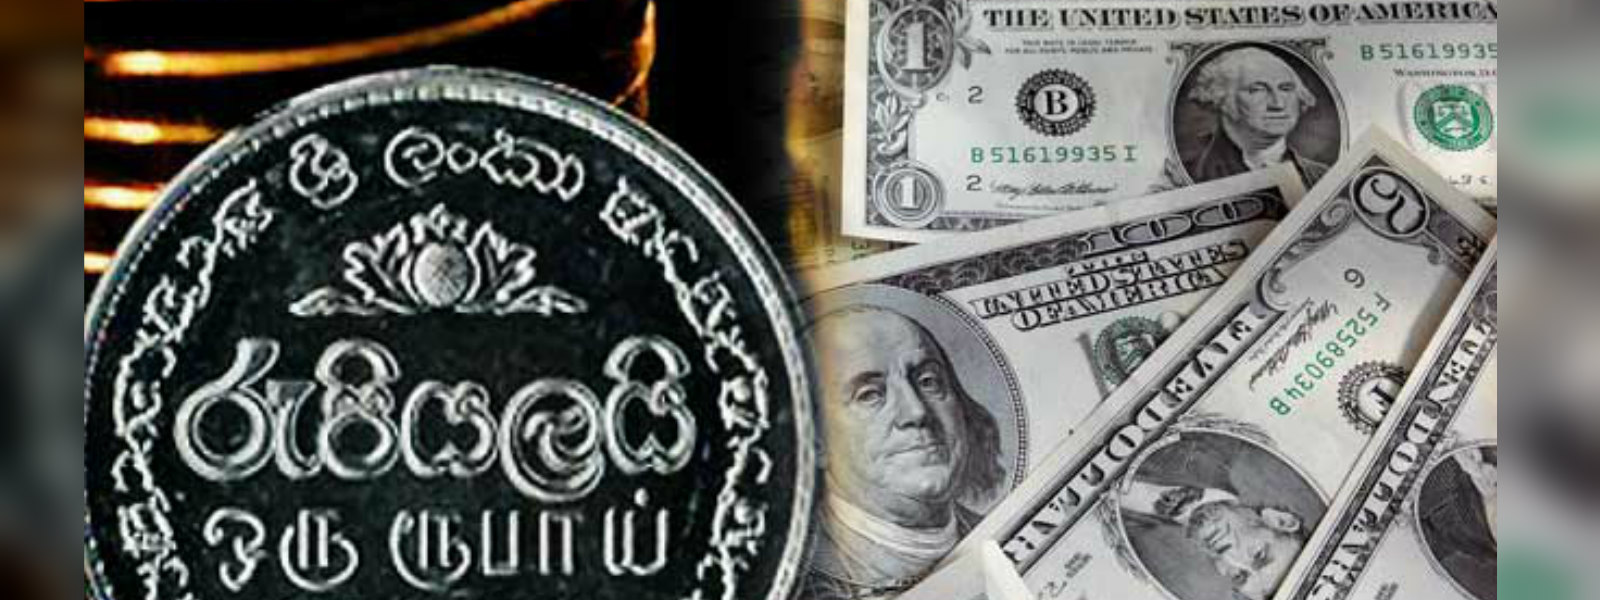 Rupee hit all time low of 172.34 against greenback